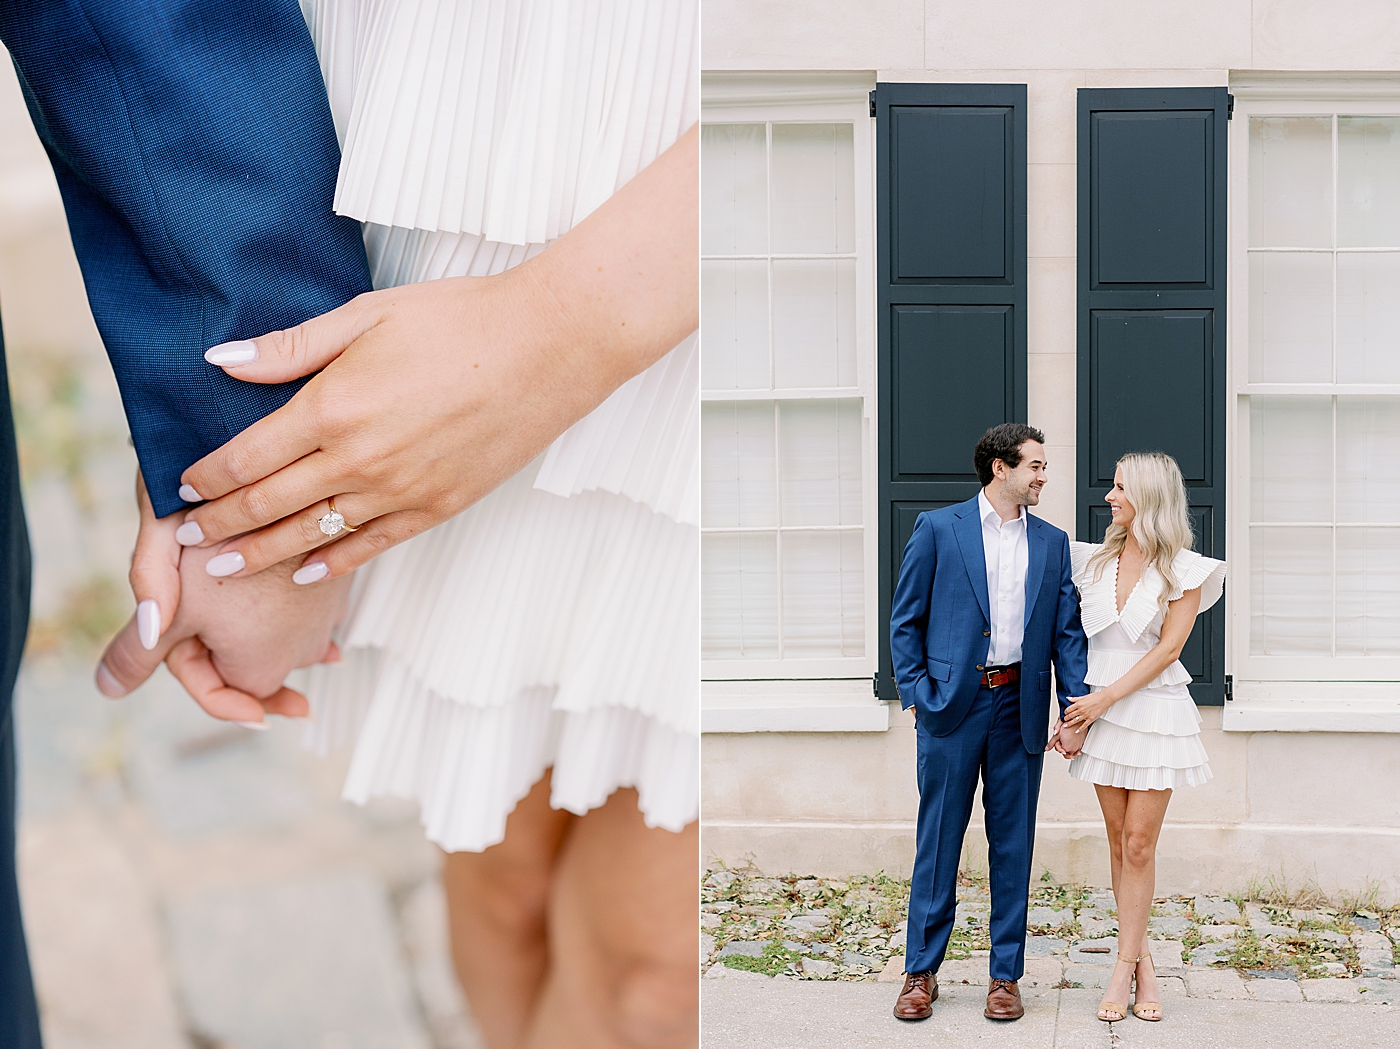 Detail of couple holding hands | Image by Annie Laura Photo